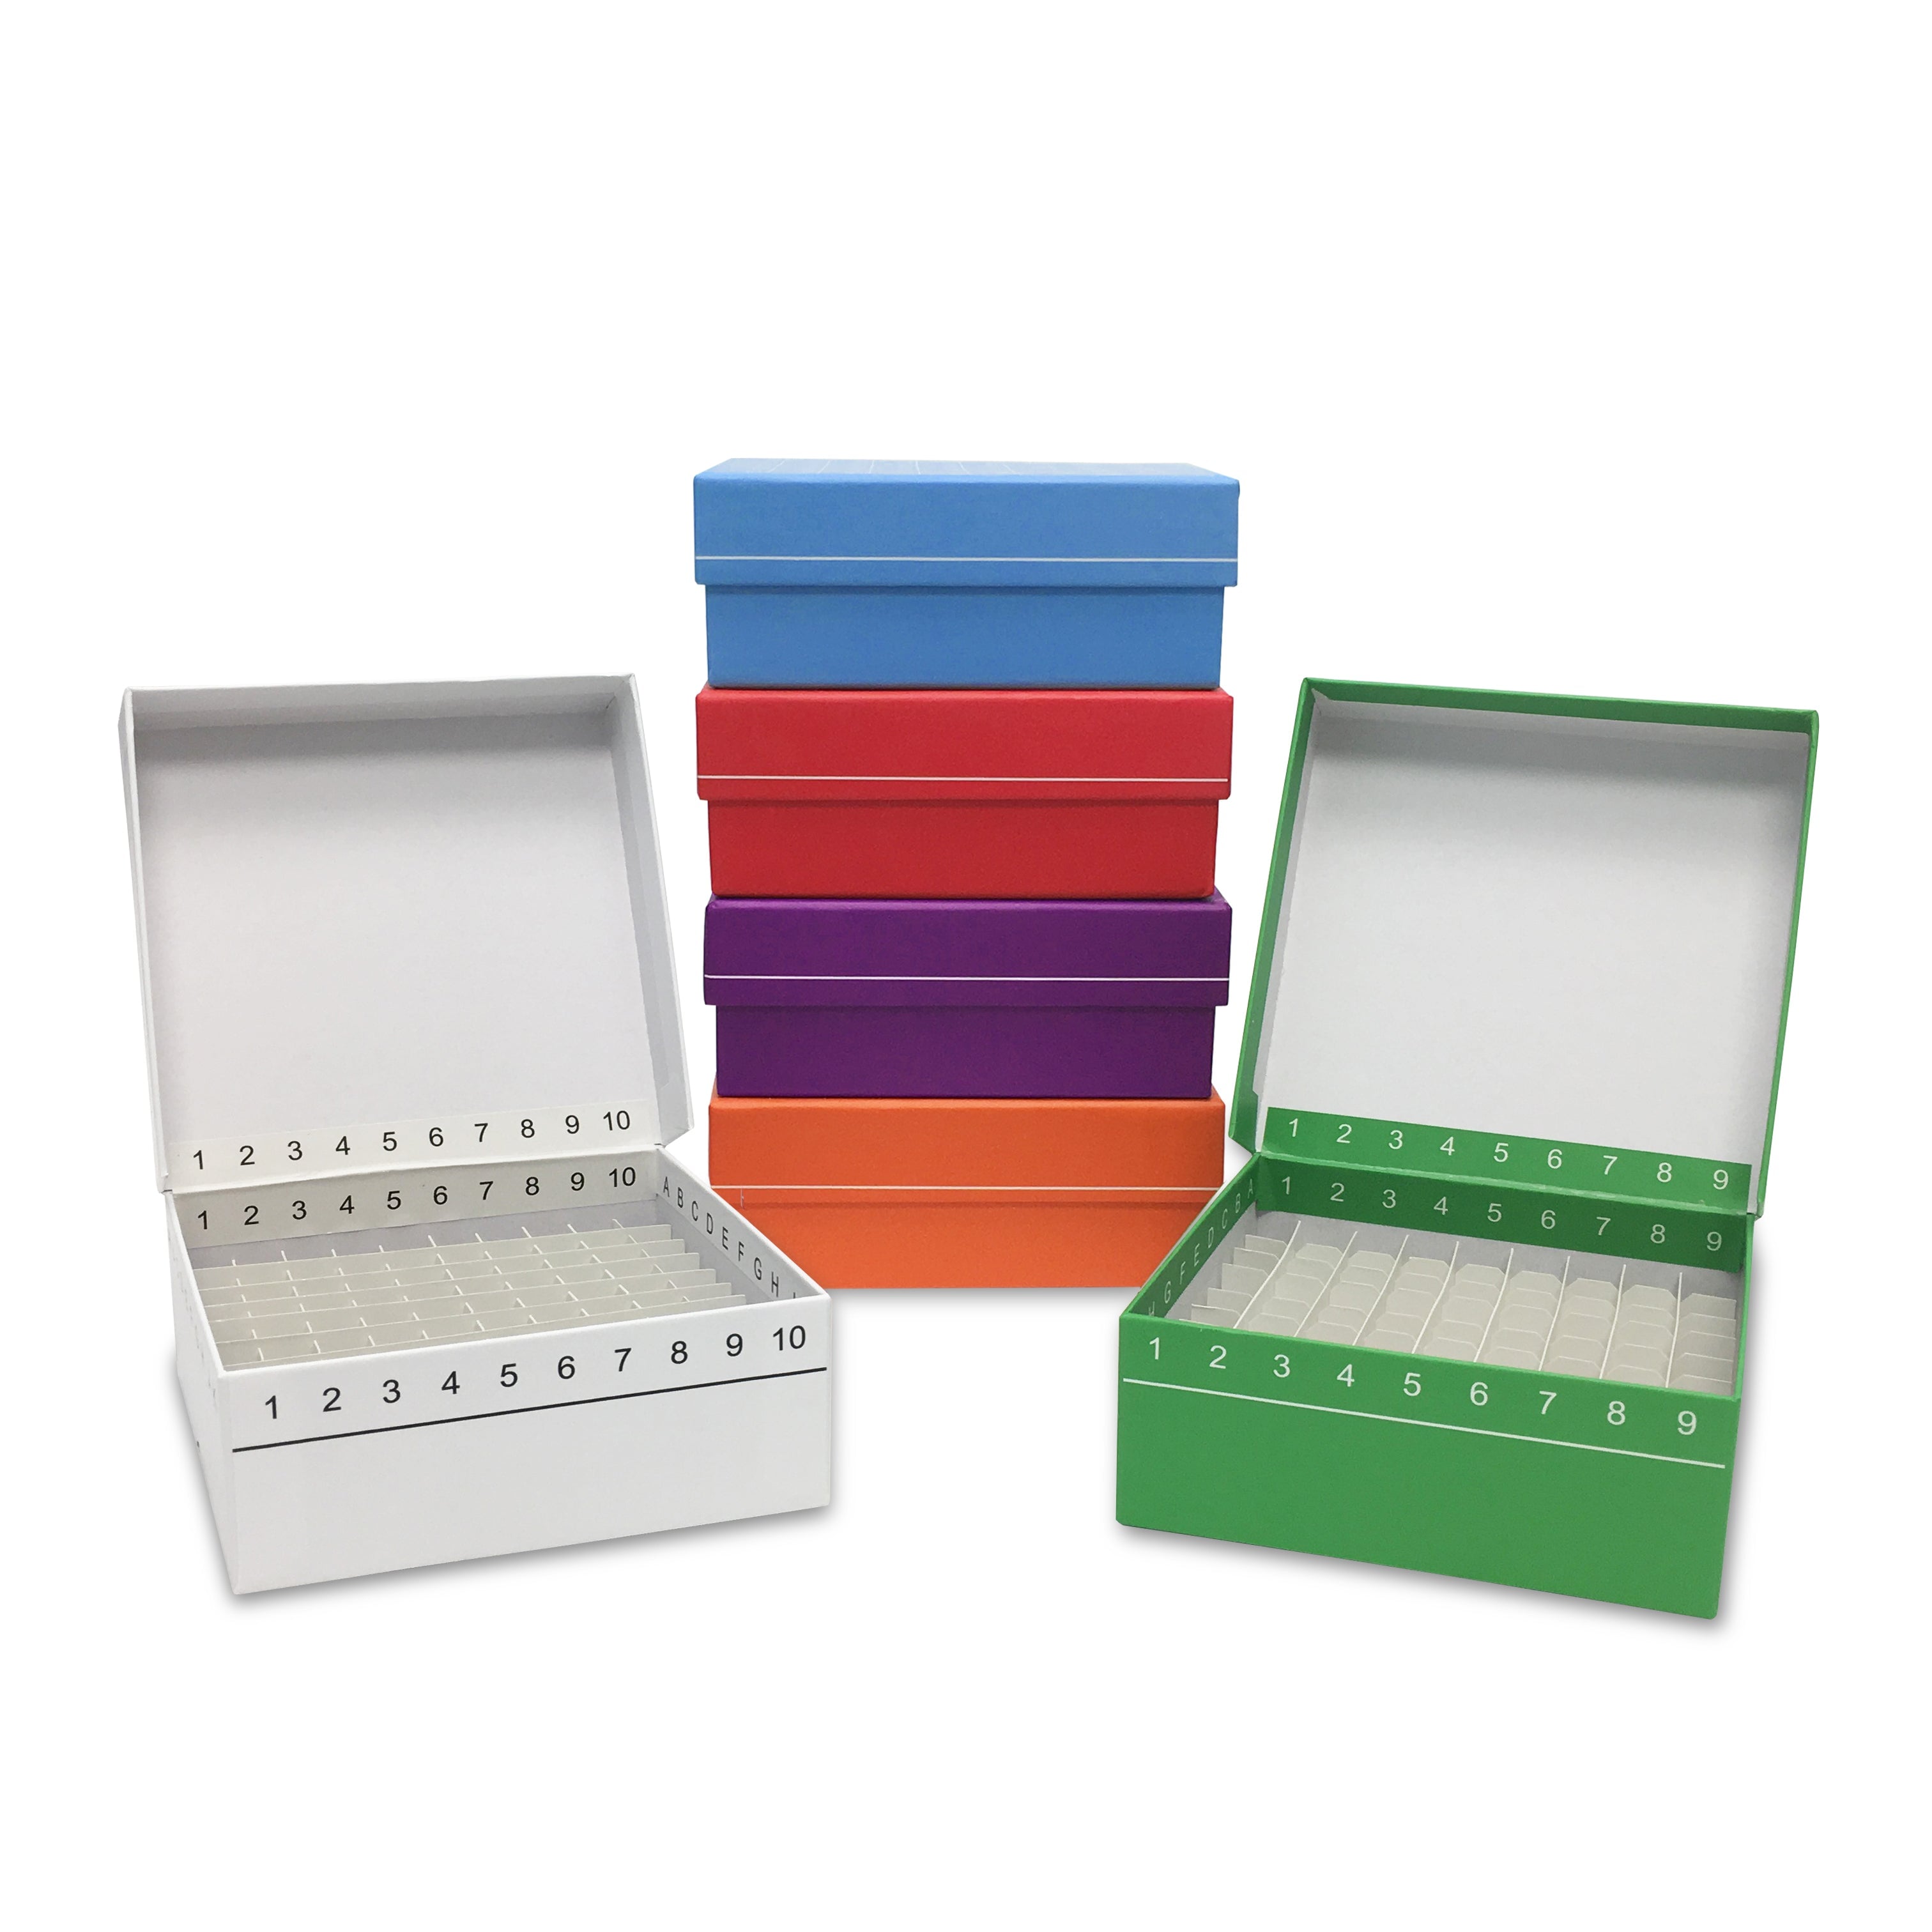 MTC Bio R2781-G FlipTop™ Carboard freezer box w/ attached hinged lid, 81-place, green, 5/pk